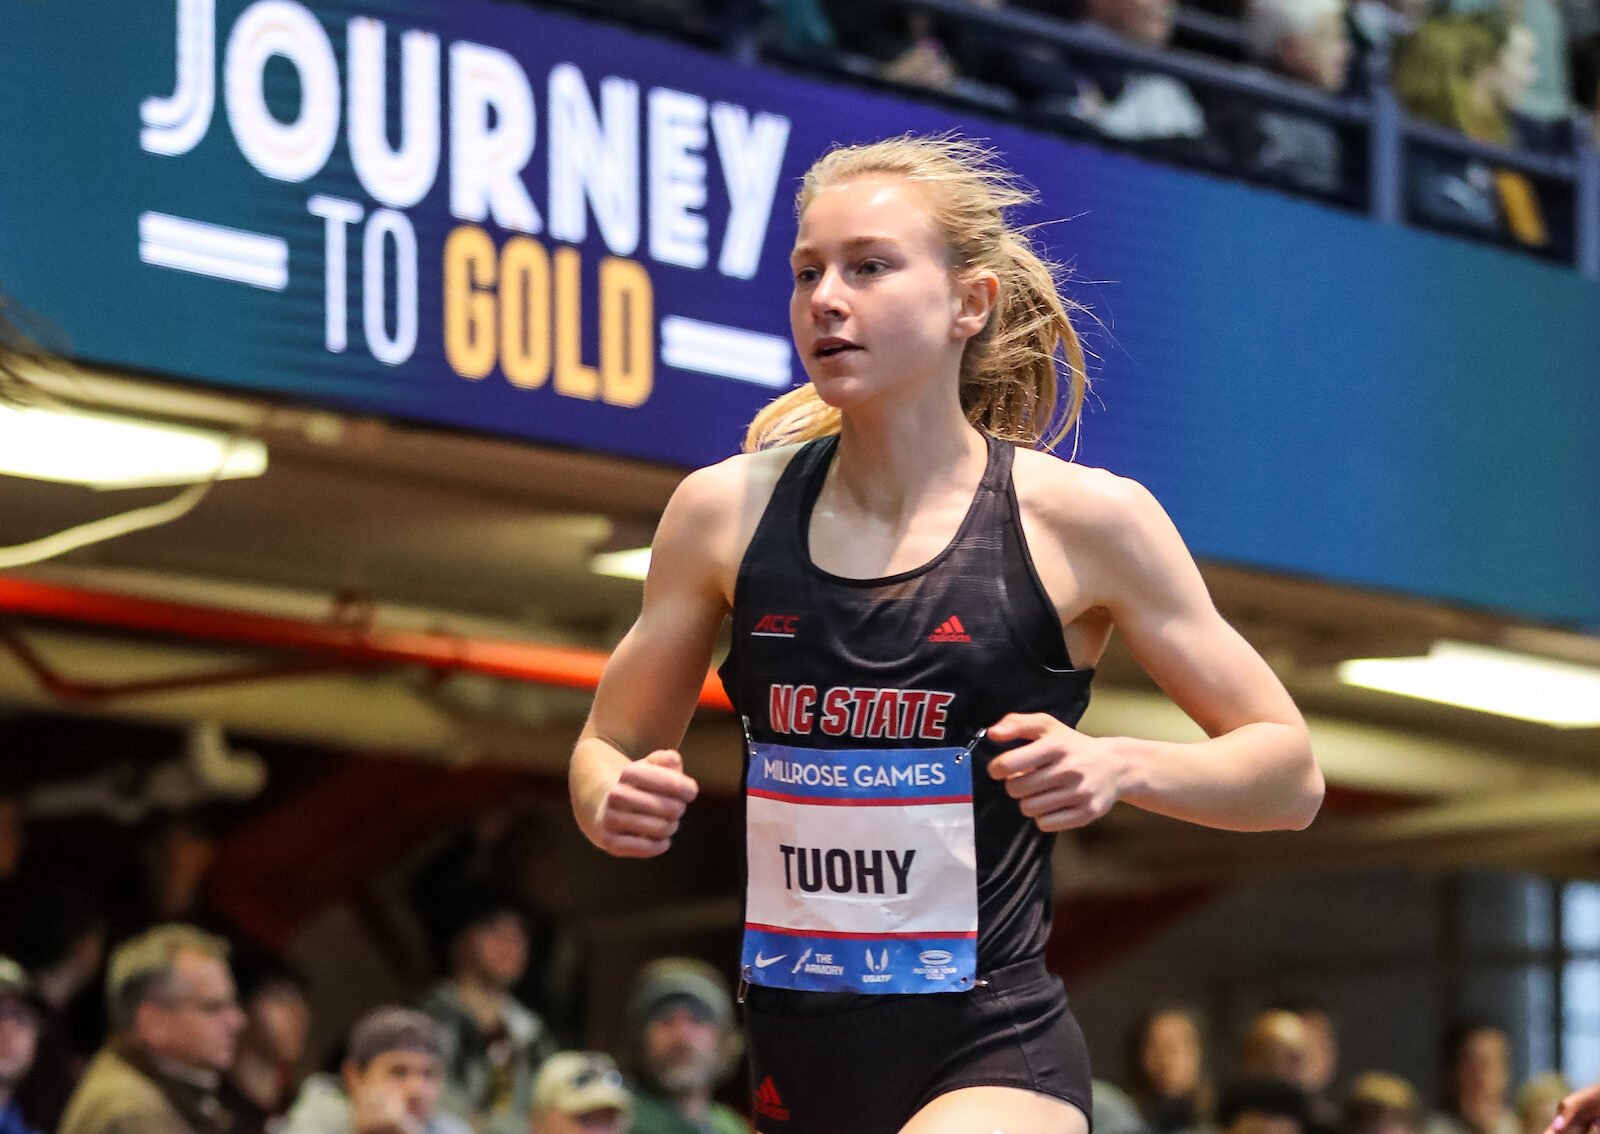 2023 NCAA Indoors Katelyn Tuohy Seeks Double, Young Stars Battle in